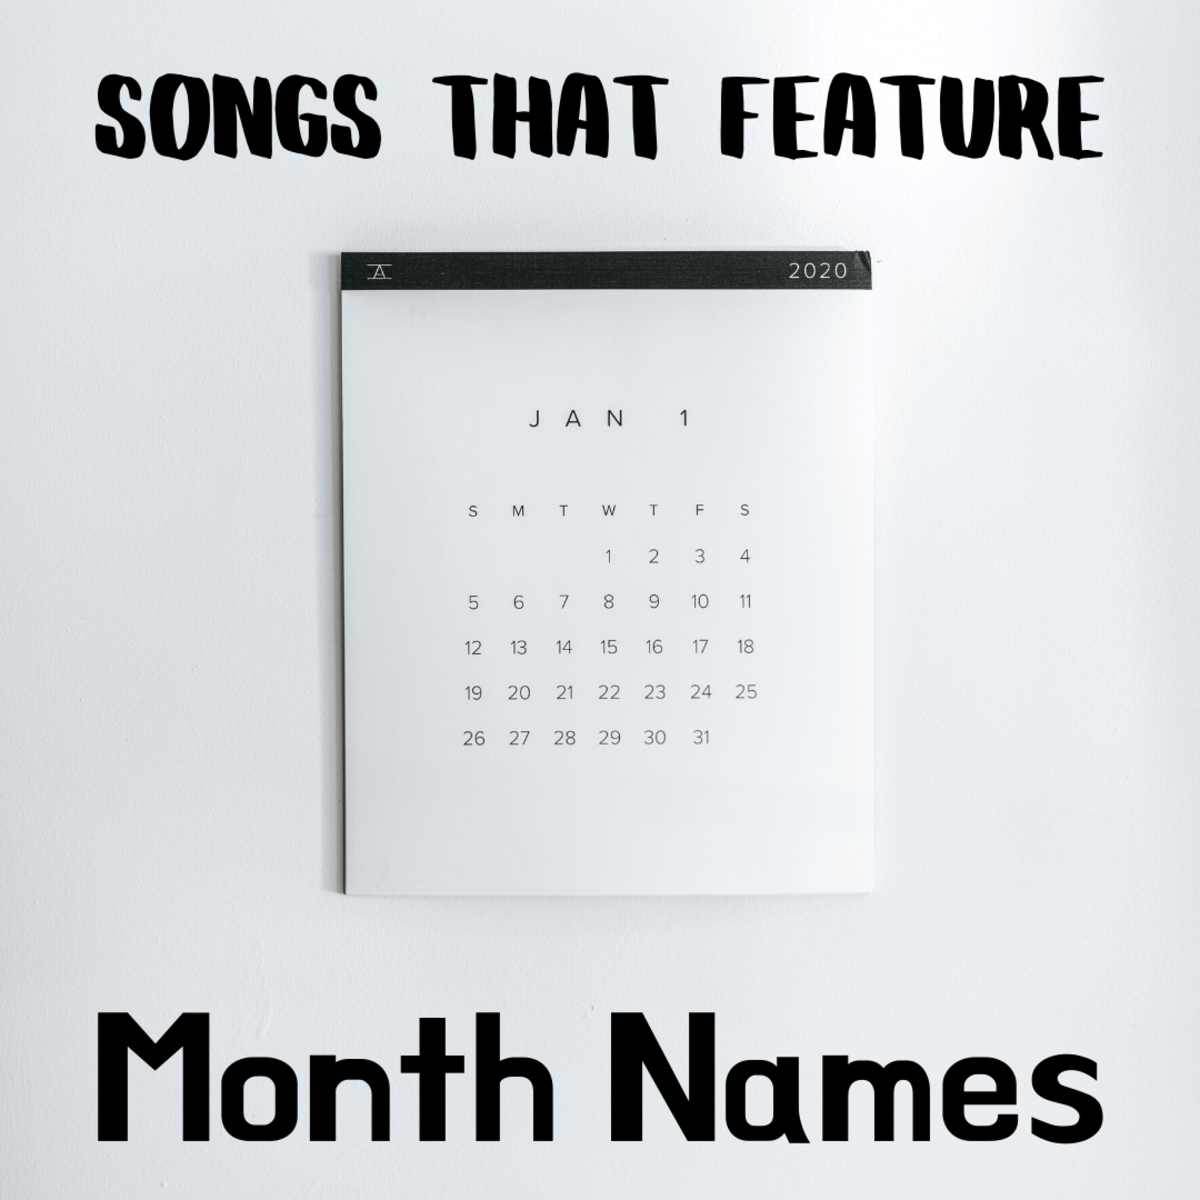 January, February, March, April, May—you can find a song with any month featured in the title. Discover them here!